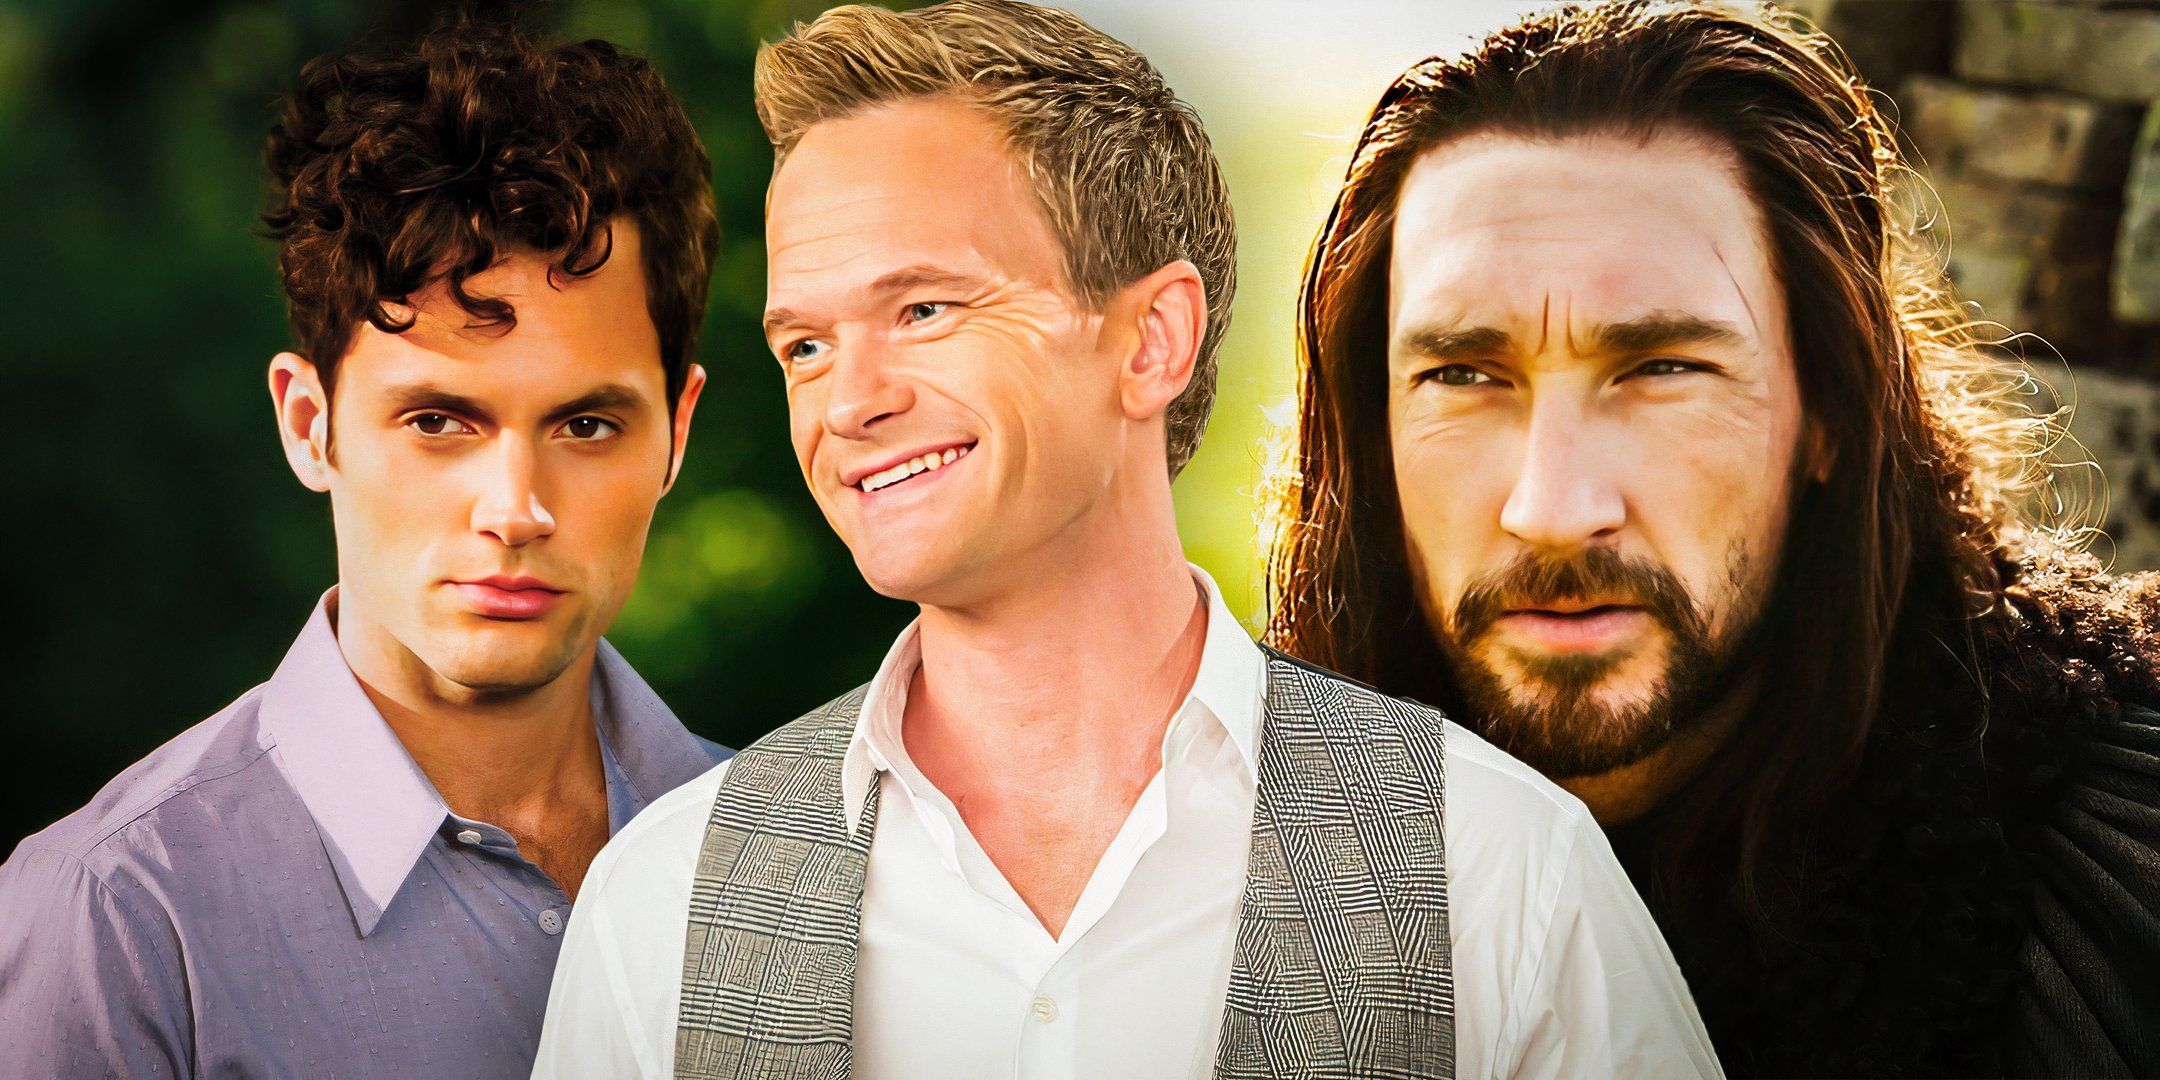 (Penn-Badgley-as-Dan-Humphrey)-from-Gossip-Girl,-(Uncle-Benjen)-from-Game-of-Thrones)-and-(Neil-Patrick-Harris-as--Barney-Stinson)-from-How-I-Met-Your-Mother-